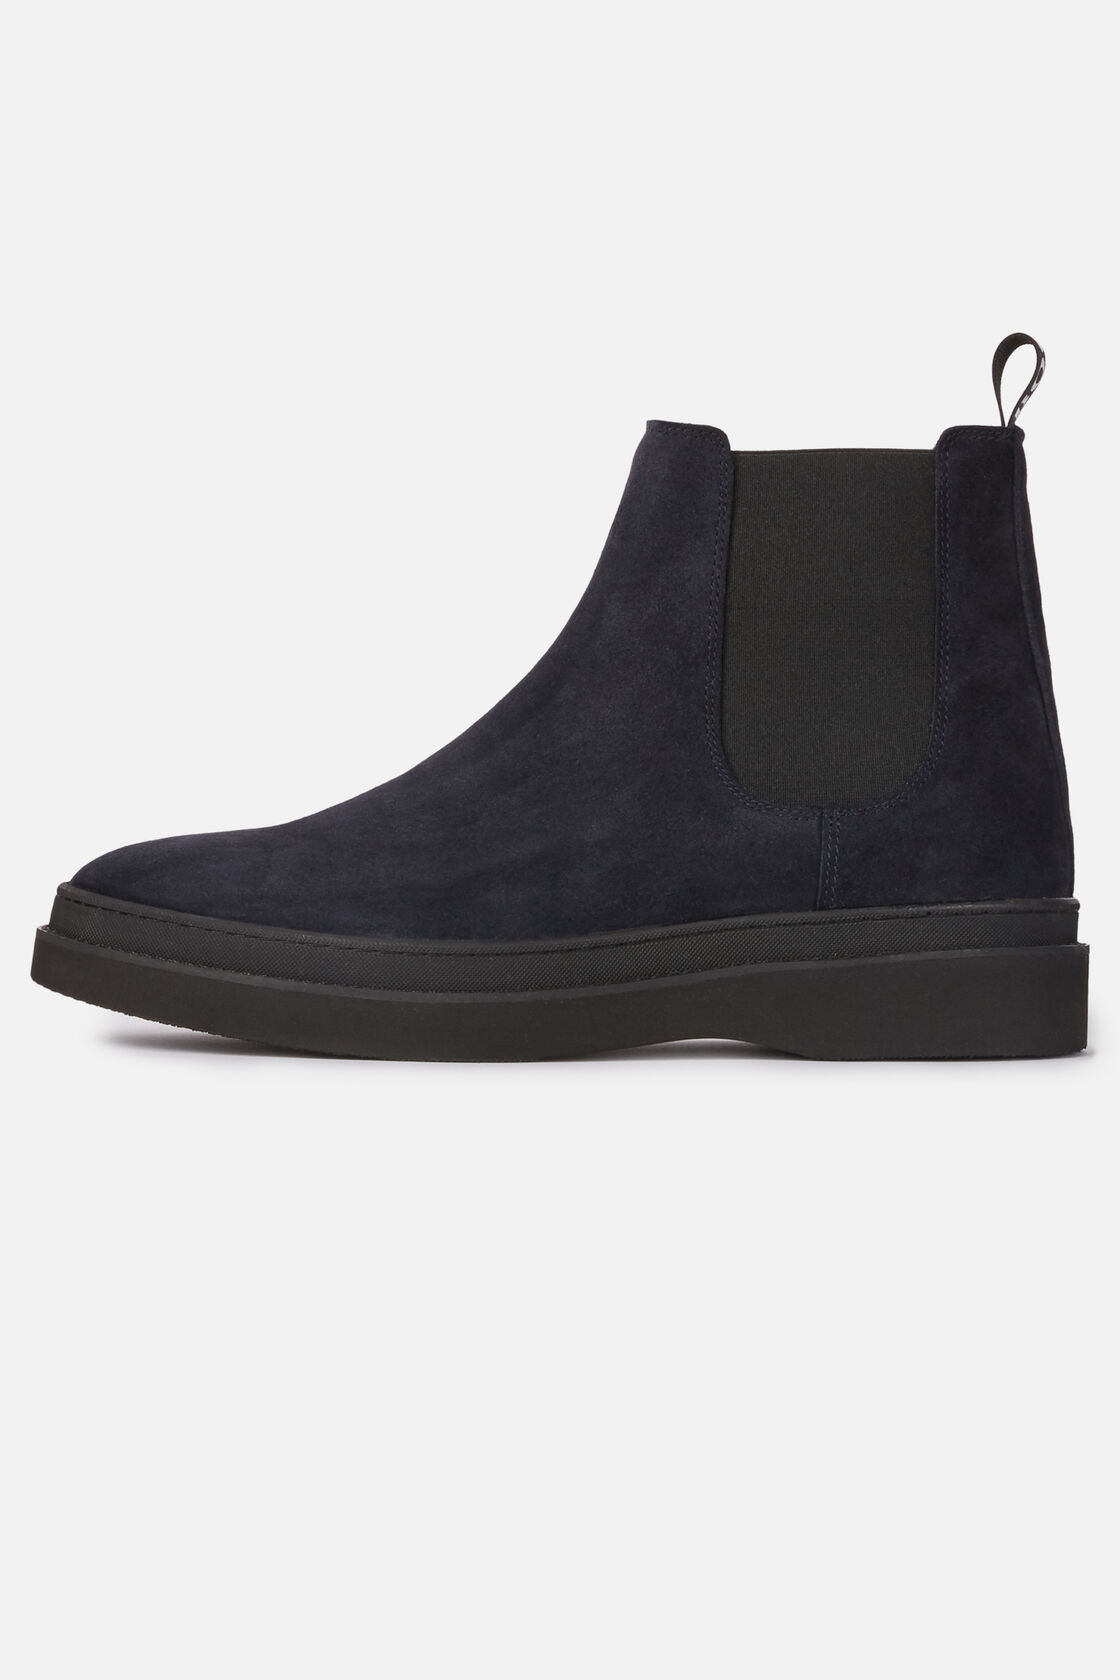 Suede Leather Ankle Boots, Navy blue, hi-res